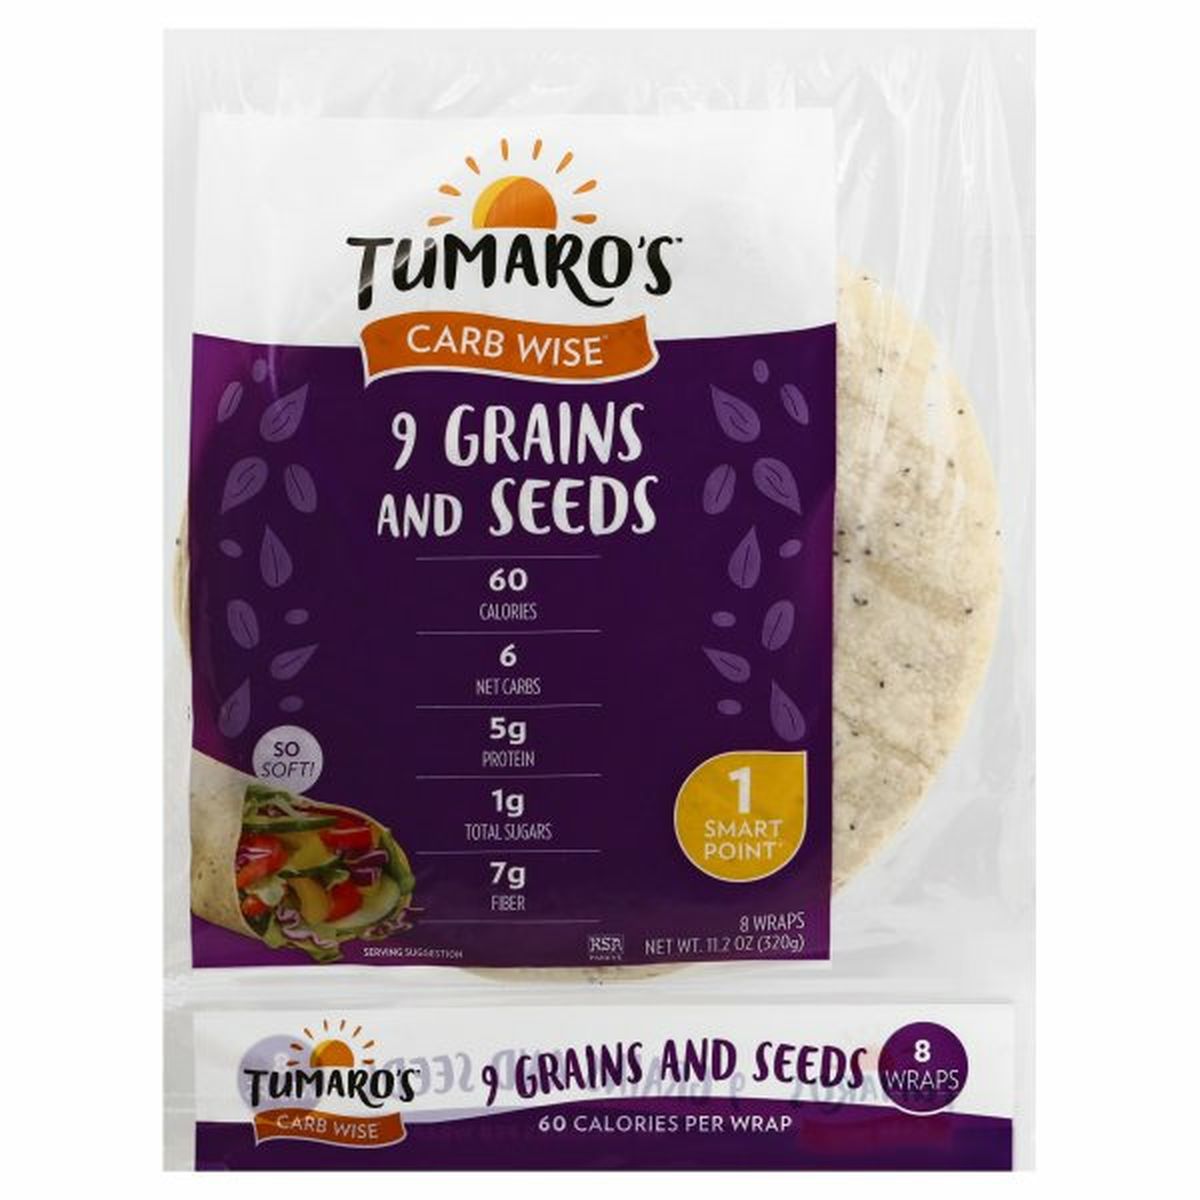 Calories in Tumaro's Carb Wise Wraps, 9 Grains and Seeds